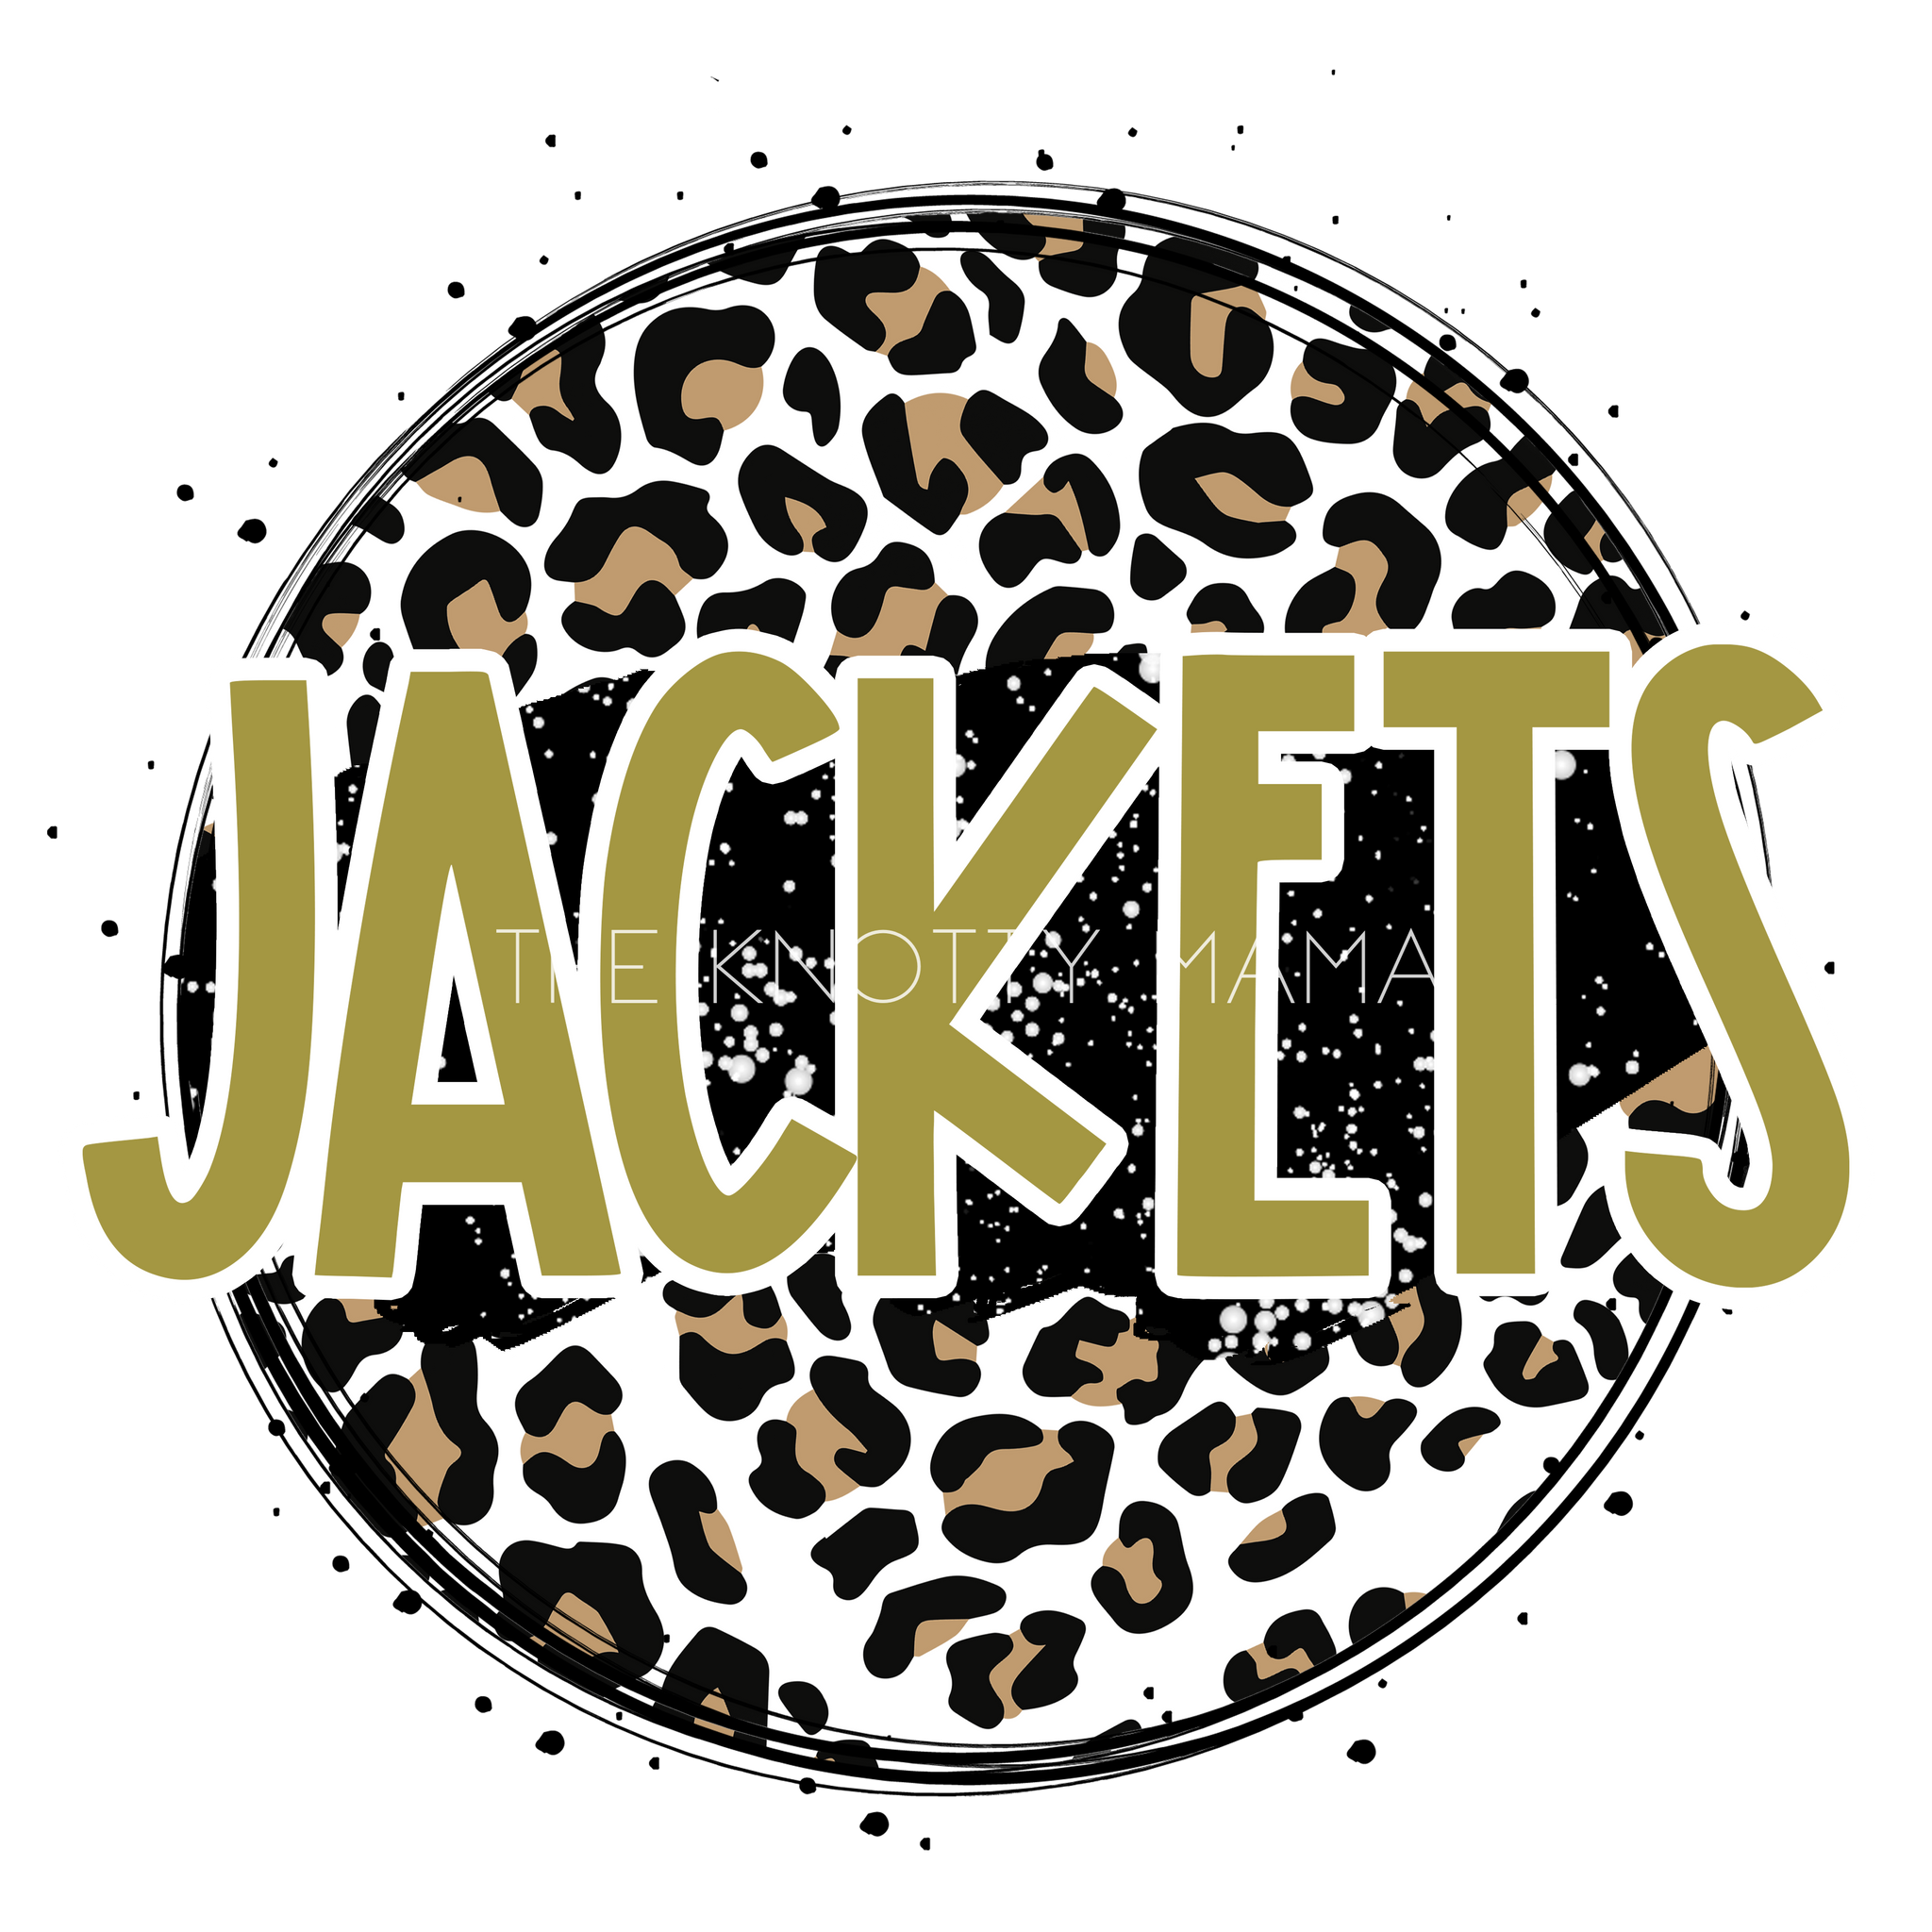 Gold Jackets - Leopard Circle PNG